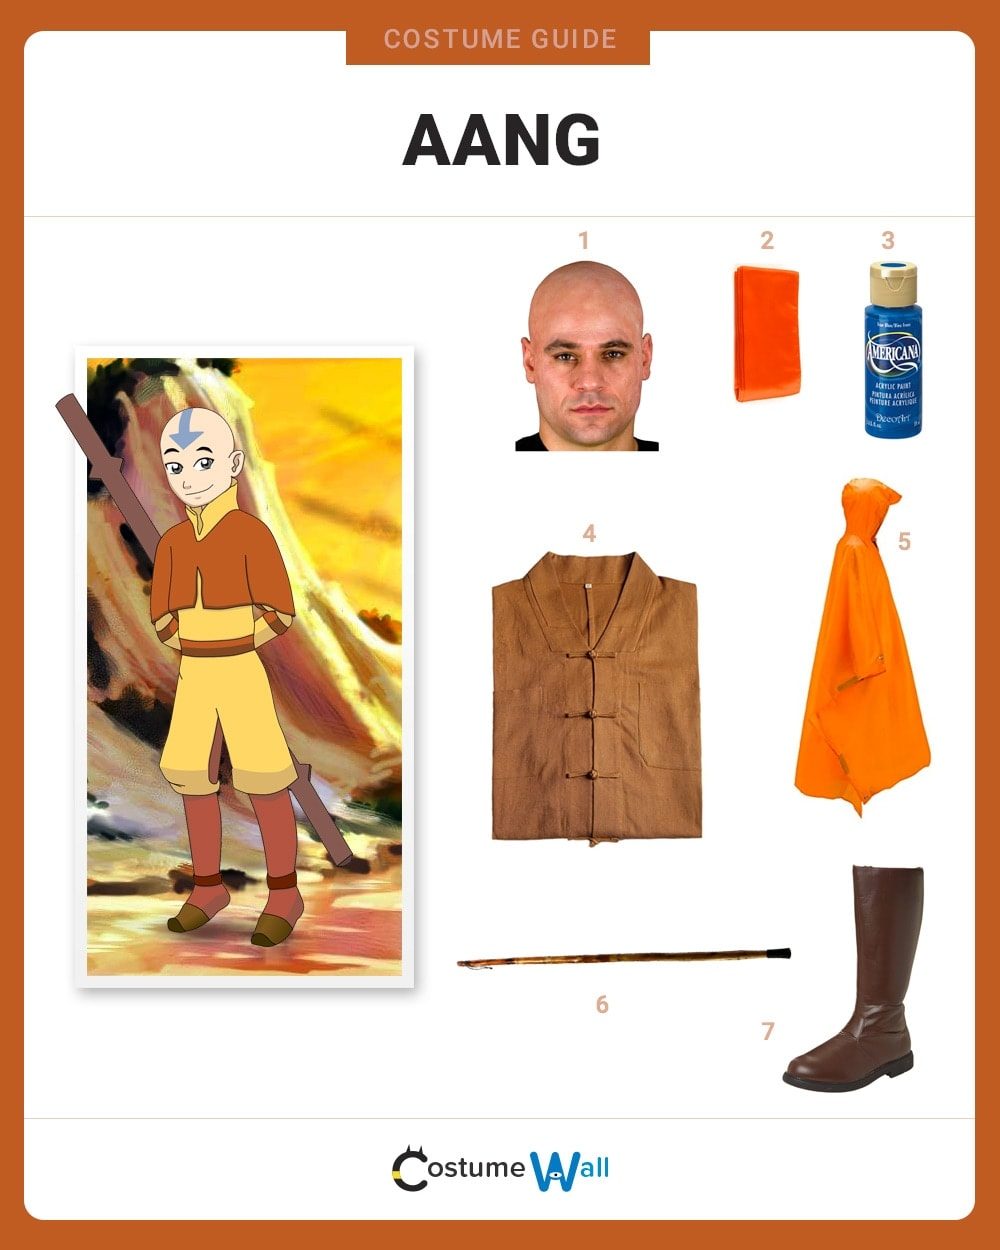 share Risky Abandonment Dress Like Aang Costume | Halloween and Cosplay Guides